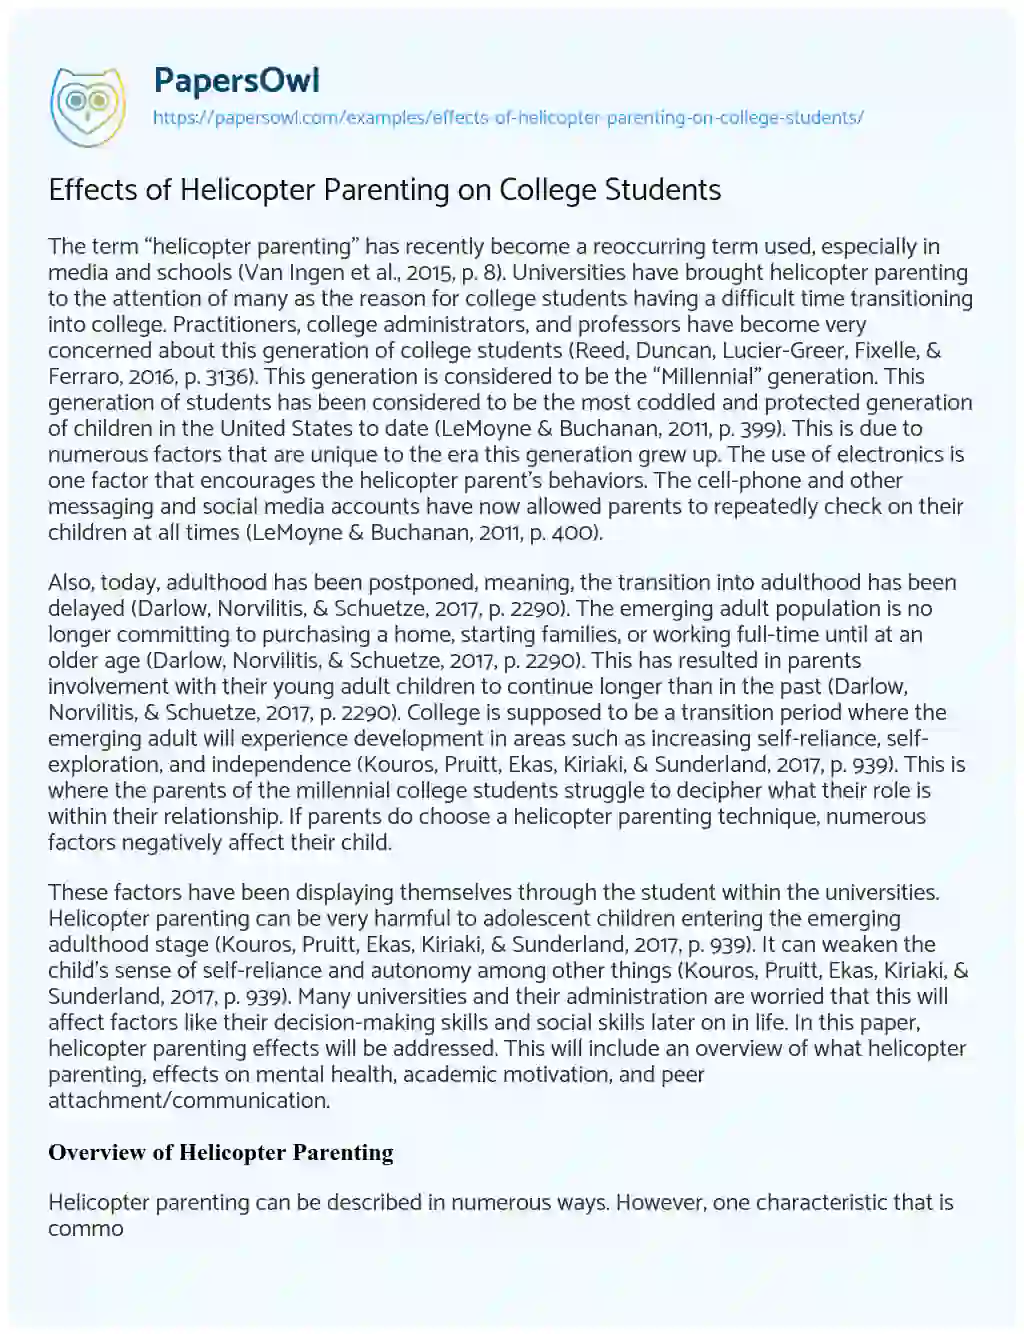 Effects of Helicopter Parenting on College Students essay